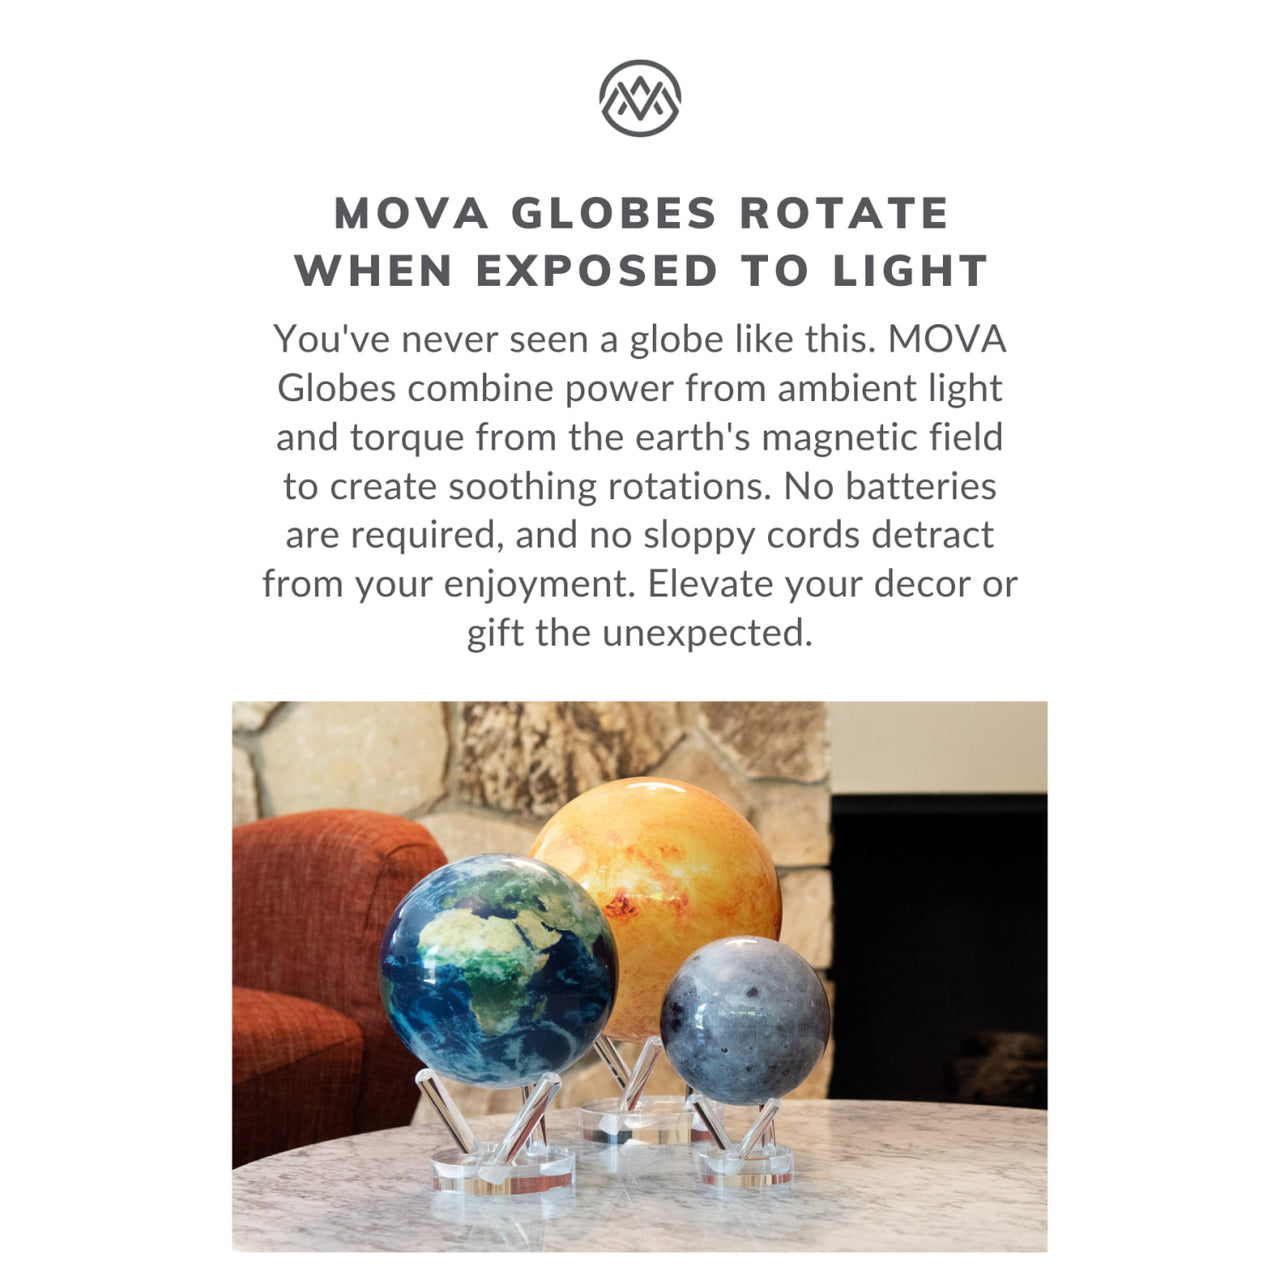 Marble table with three MovA globes featuring Earth’s moon on acrylic bases